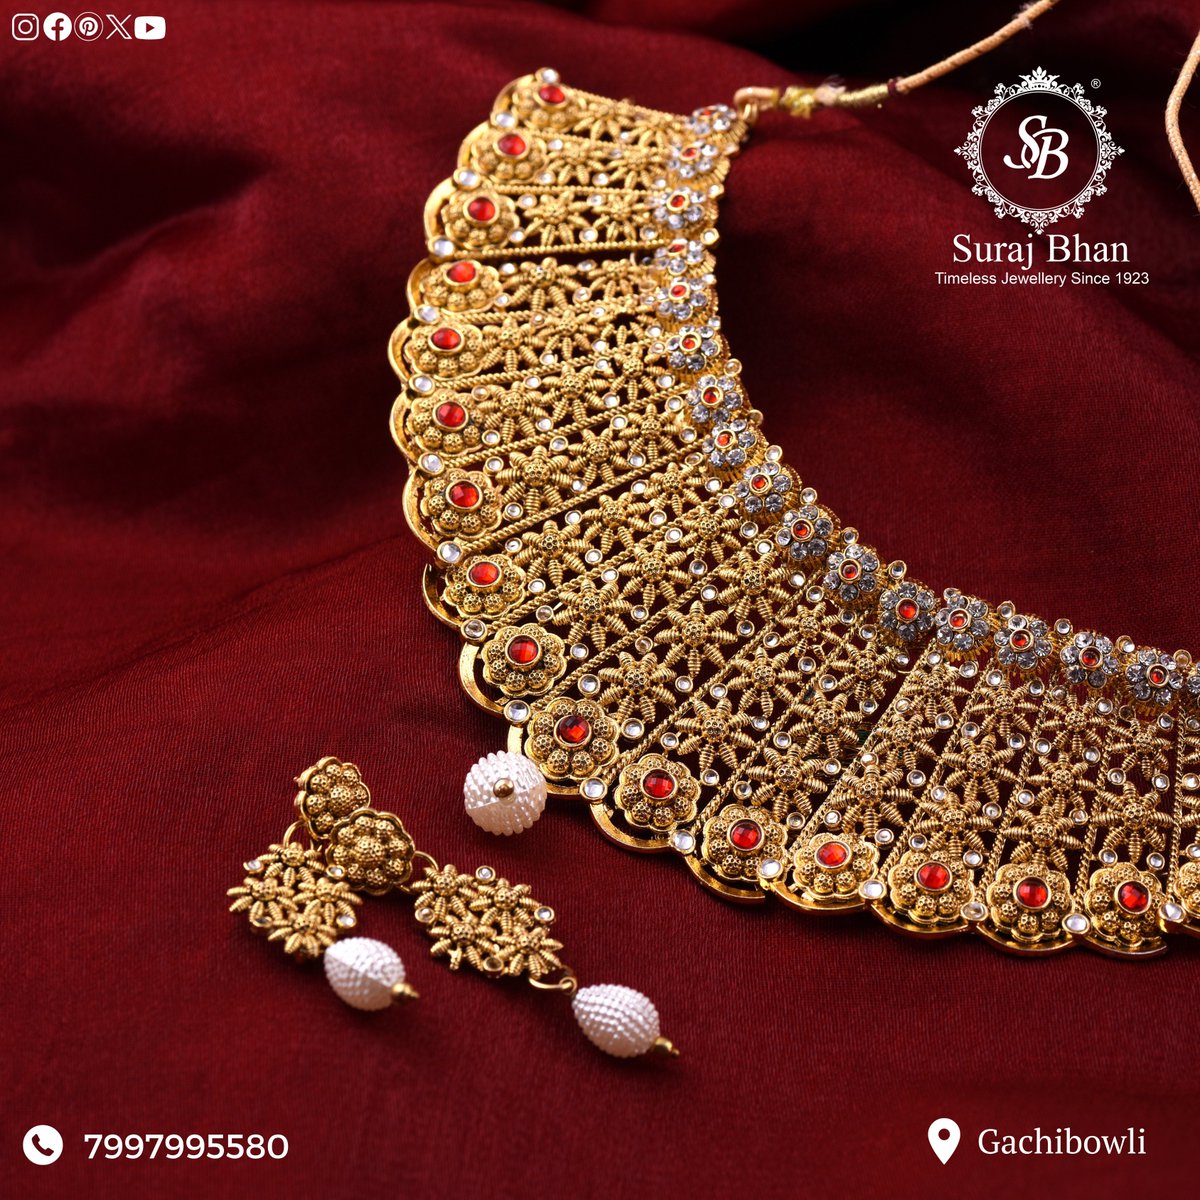 This Gold Choker Set from Suraj Bhan Jewllery Hub is designed to complement your Ever-Evolving style.
.
For inquiries please contact - 7997995580.
.
#newcolections #choker #chokerset #goldchokerset #chokercollection #chokerdesign #ChokerNecklace #ModernChokers #UniqueChokers